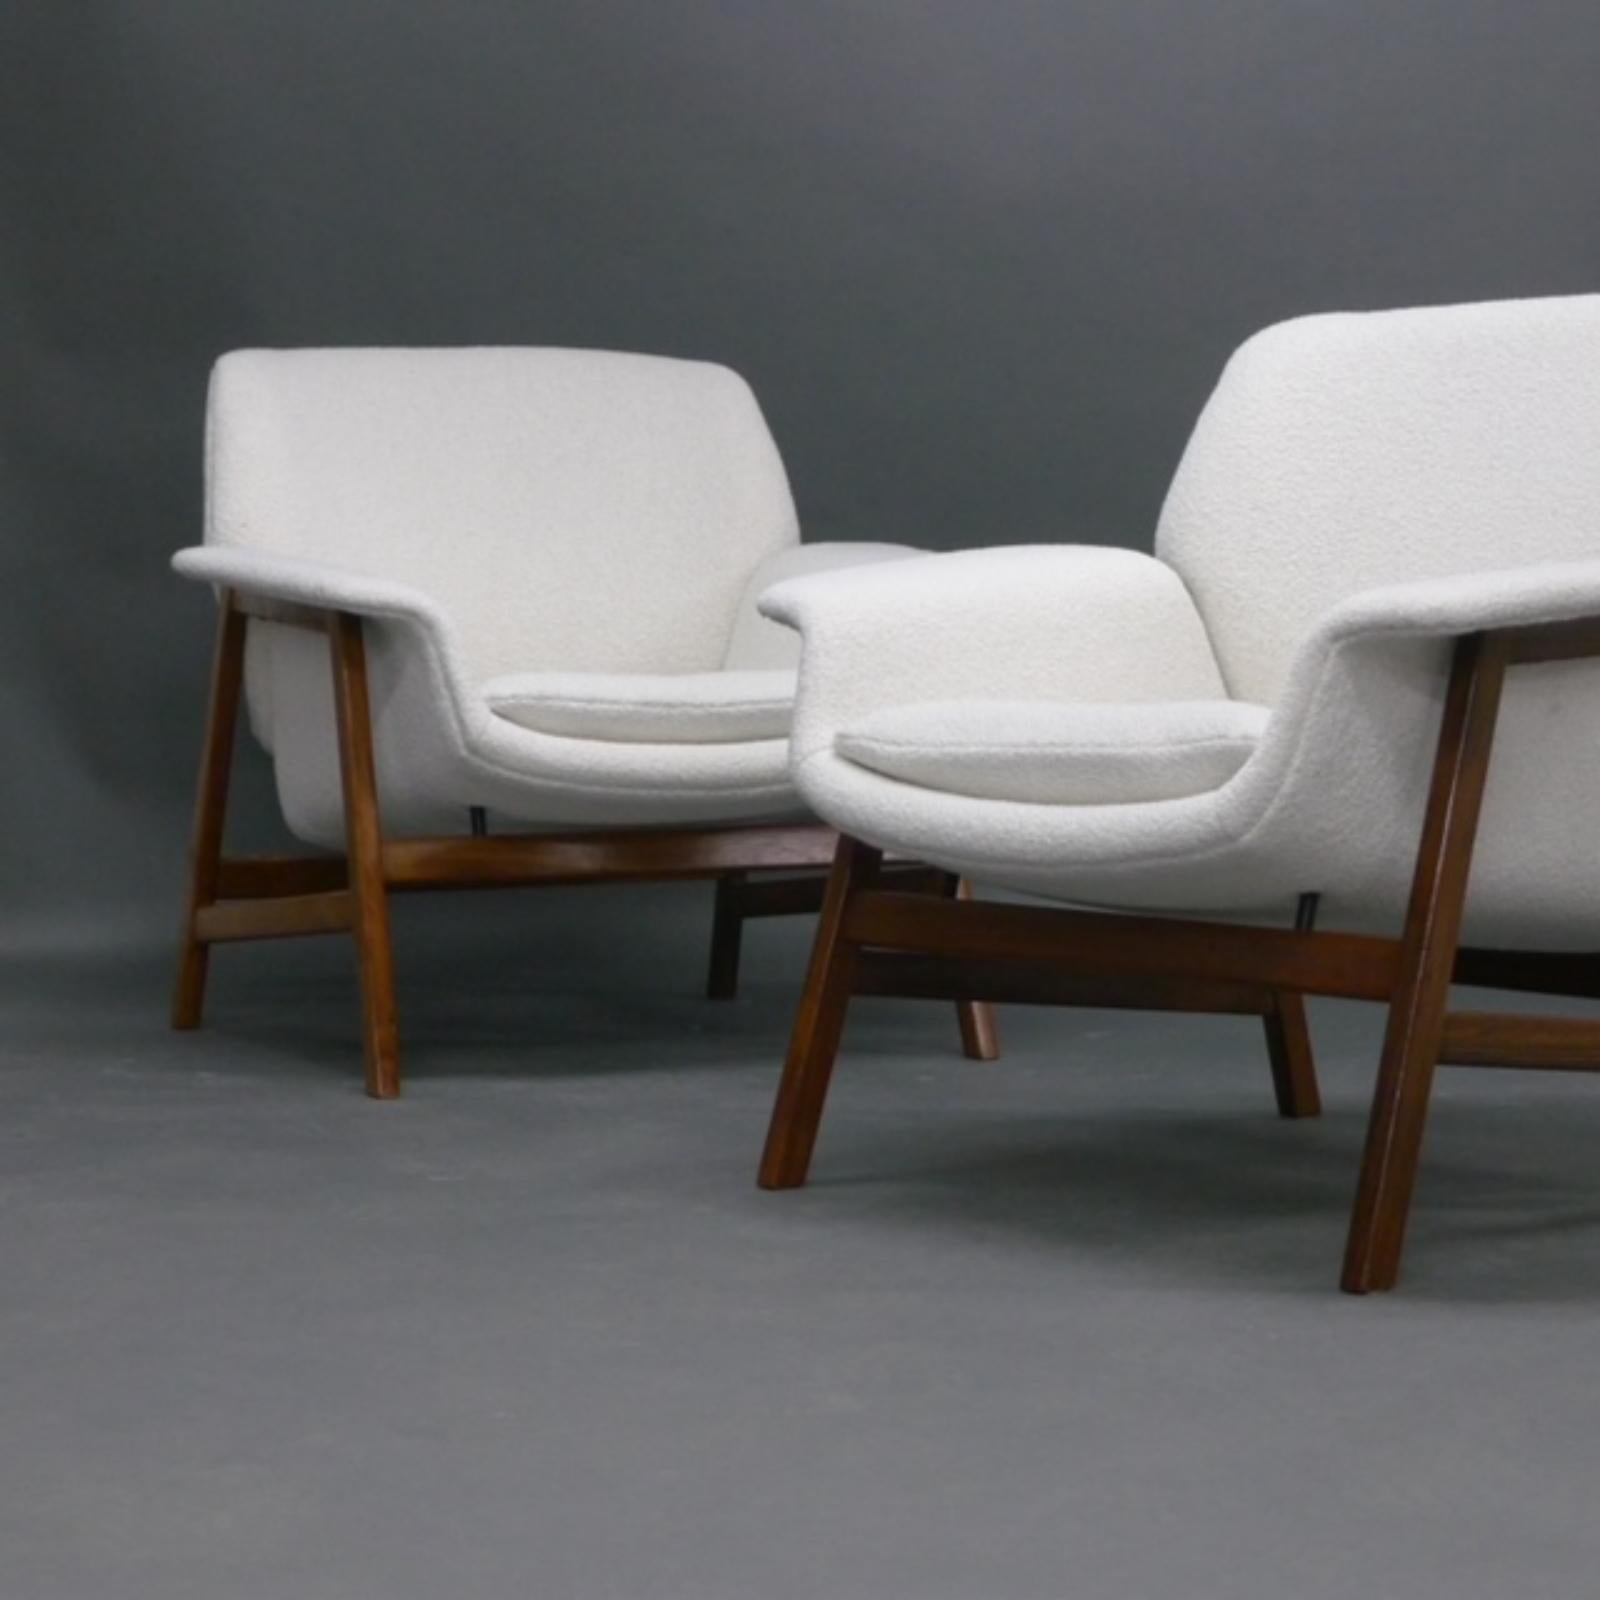 Mid-Century Modern Gianfranco Frattini, Pair of Lounge Chairs, model 849 for Cassina, 1950s For Sale